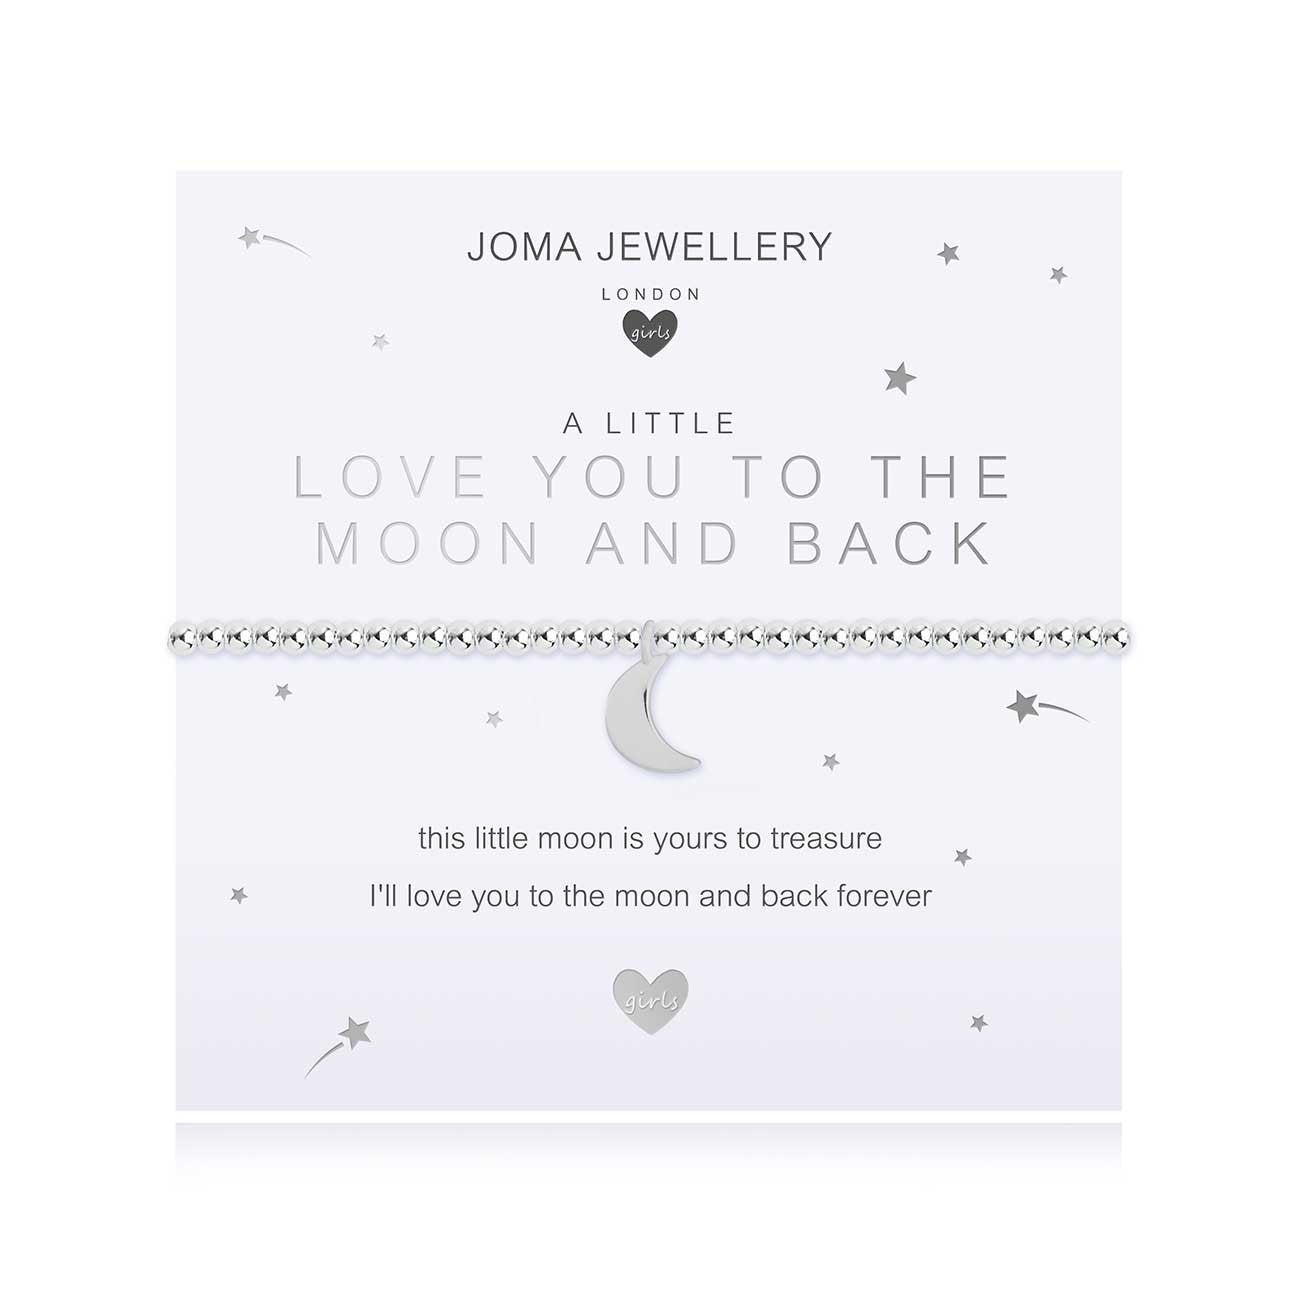 Joma Jewellery Children's a little Love You To The Moon And Back Bracelet | More Than Just A Gift | Authorised Joma Jewellery Stockist| More Than Just A Gift